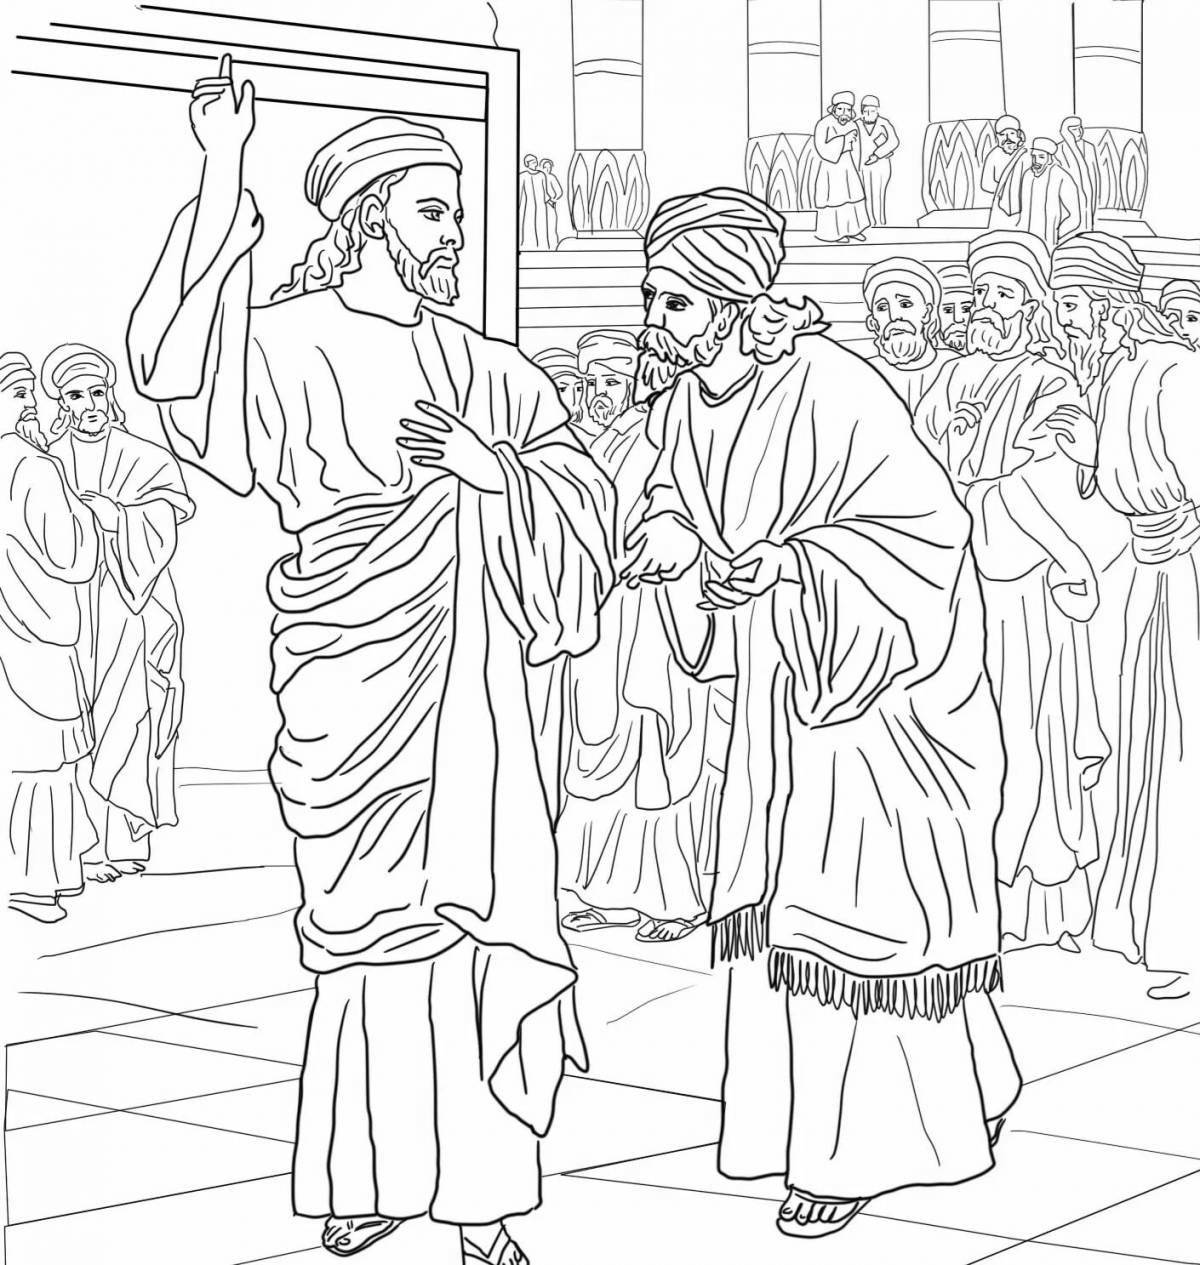 Entertaining publican and Pharisee coloring book